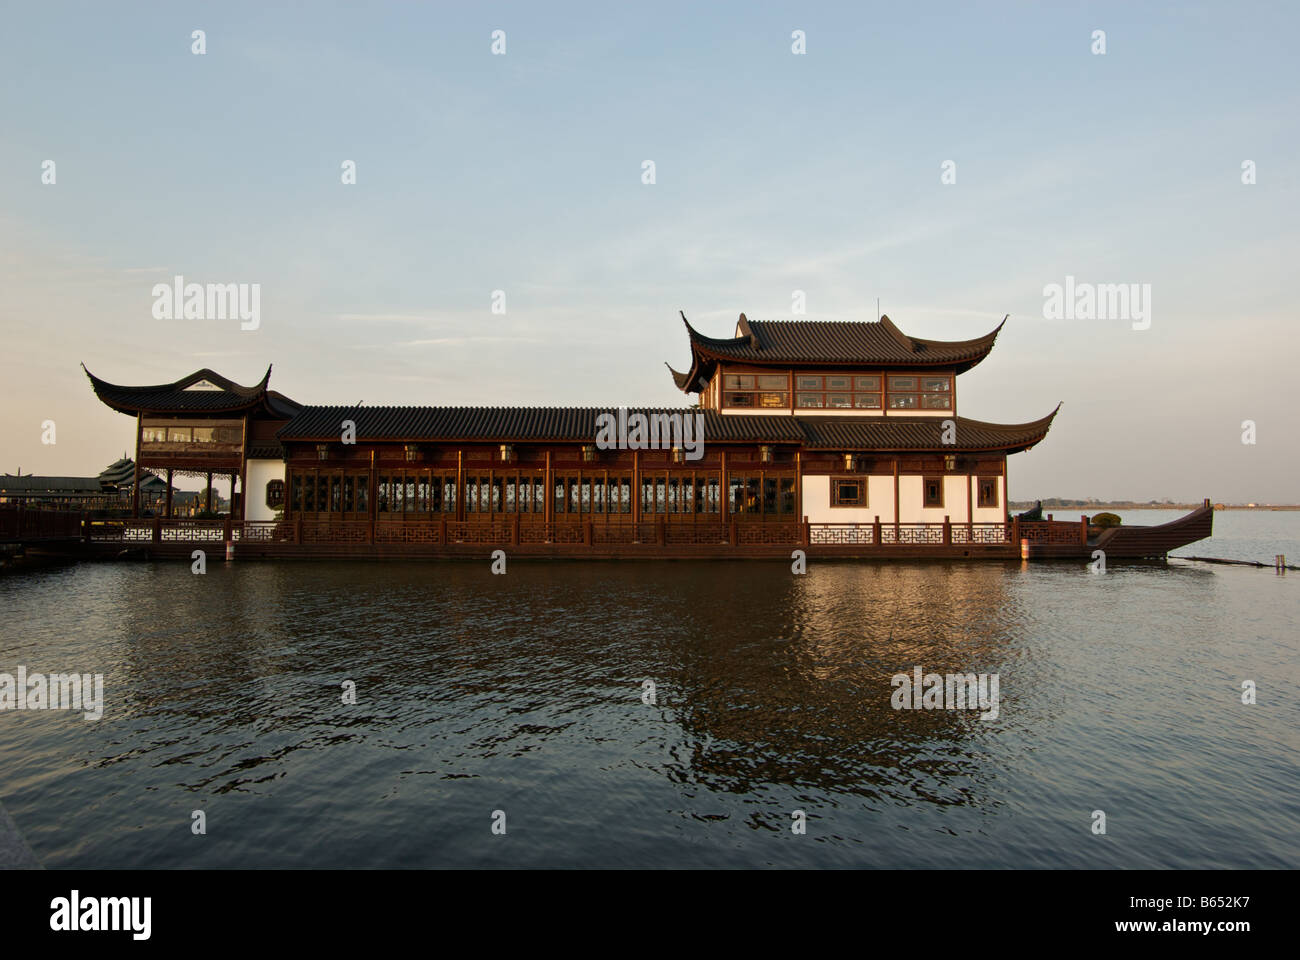 Zhouzhuang marble stone boat convention building on Baixian Lake at Yunhai Resort in Watertown Venice of the east Stock Photo